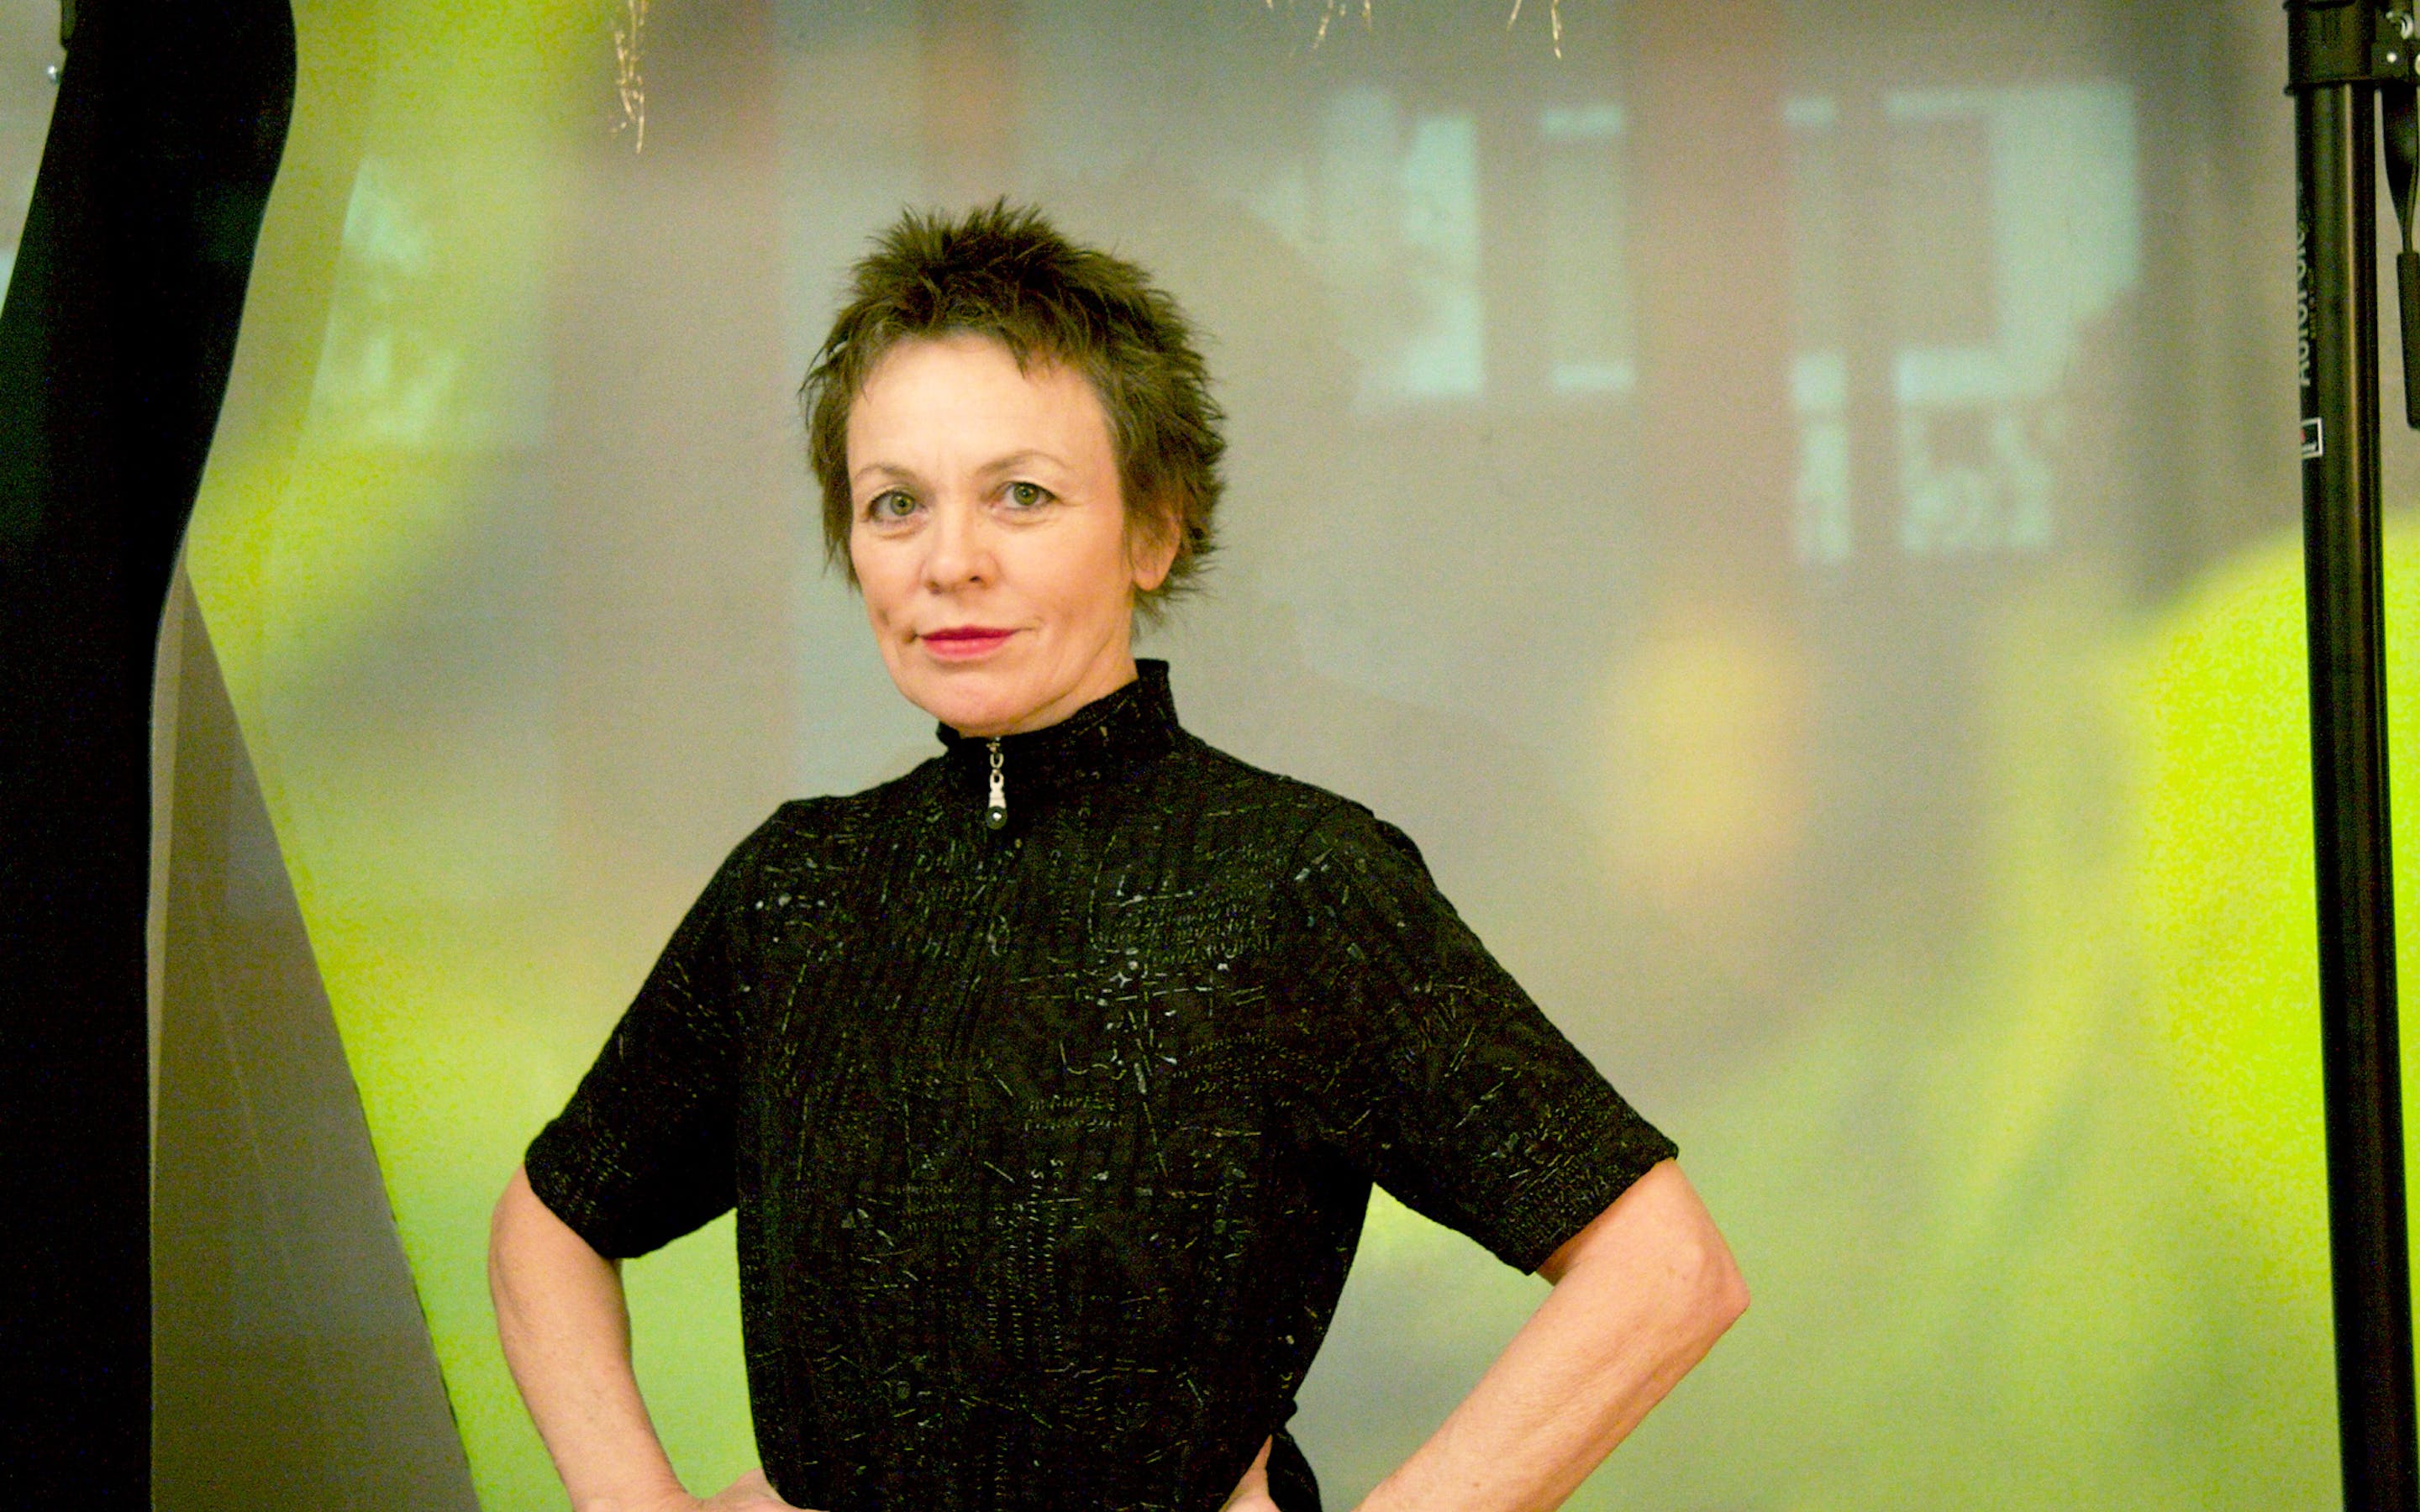 Lee Vul in De neiging hebben Walker Art Center and the Saint Paul Chamber Orchestra's Liquid Music  Series present performance artist pioneer Laurie Anderson's Dirtday!  Tickets on pre-sale to Walker Members and SPCO subscribers until May 17